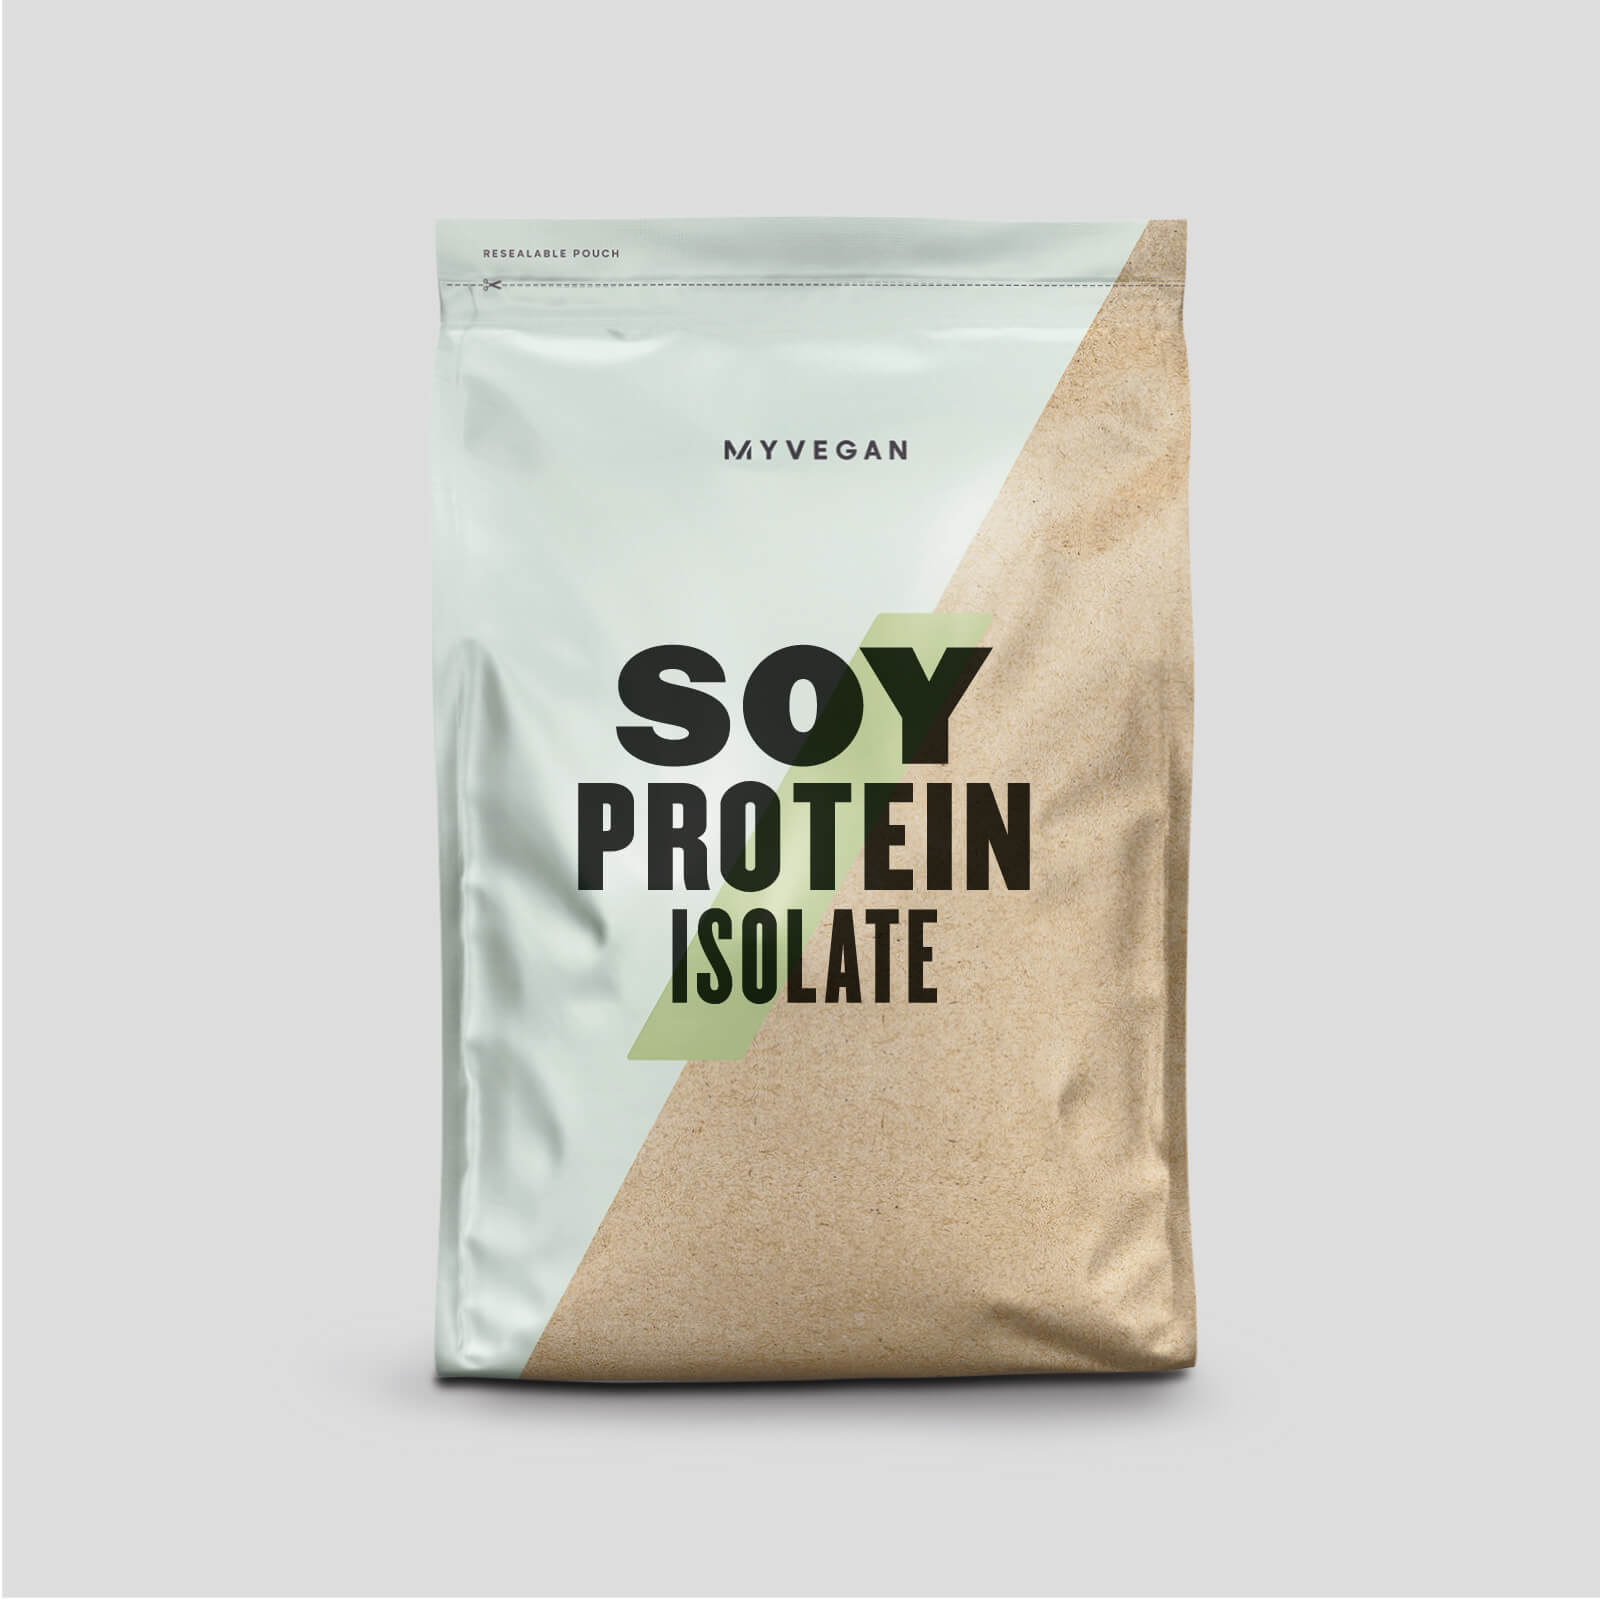 Soy Protein Isolate - 500g - ไม่มีรสปรุ่งแต่ง